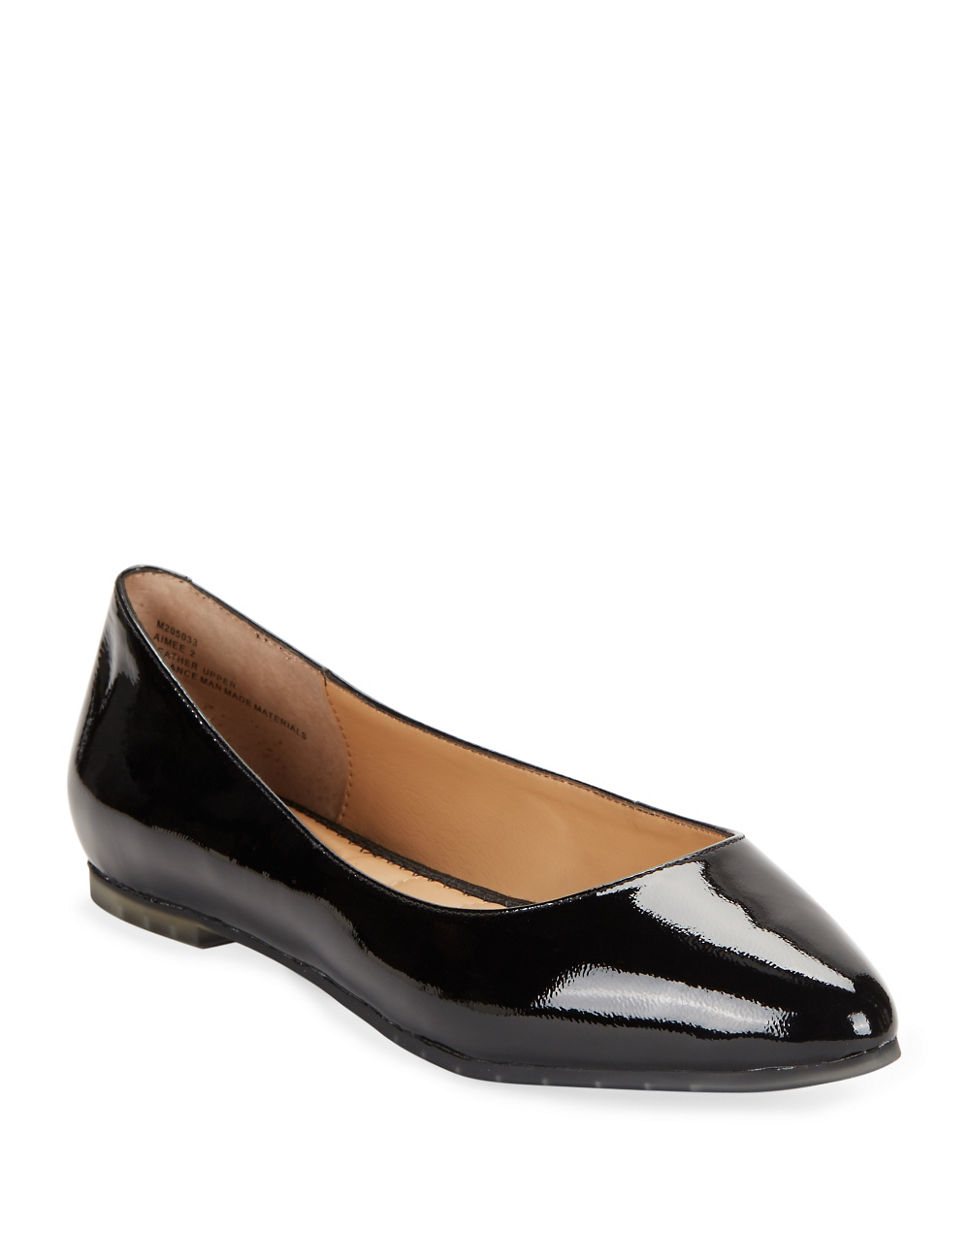 Lyst - Me Too Aimee Patent Leather Flats in Black